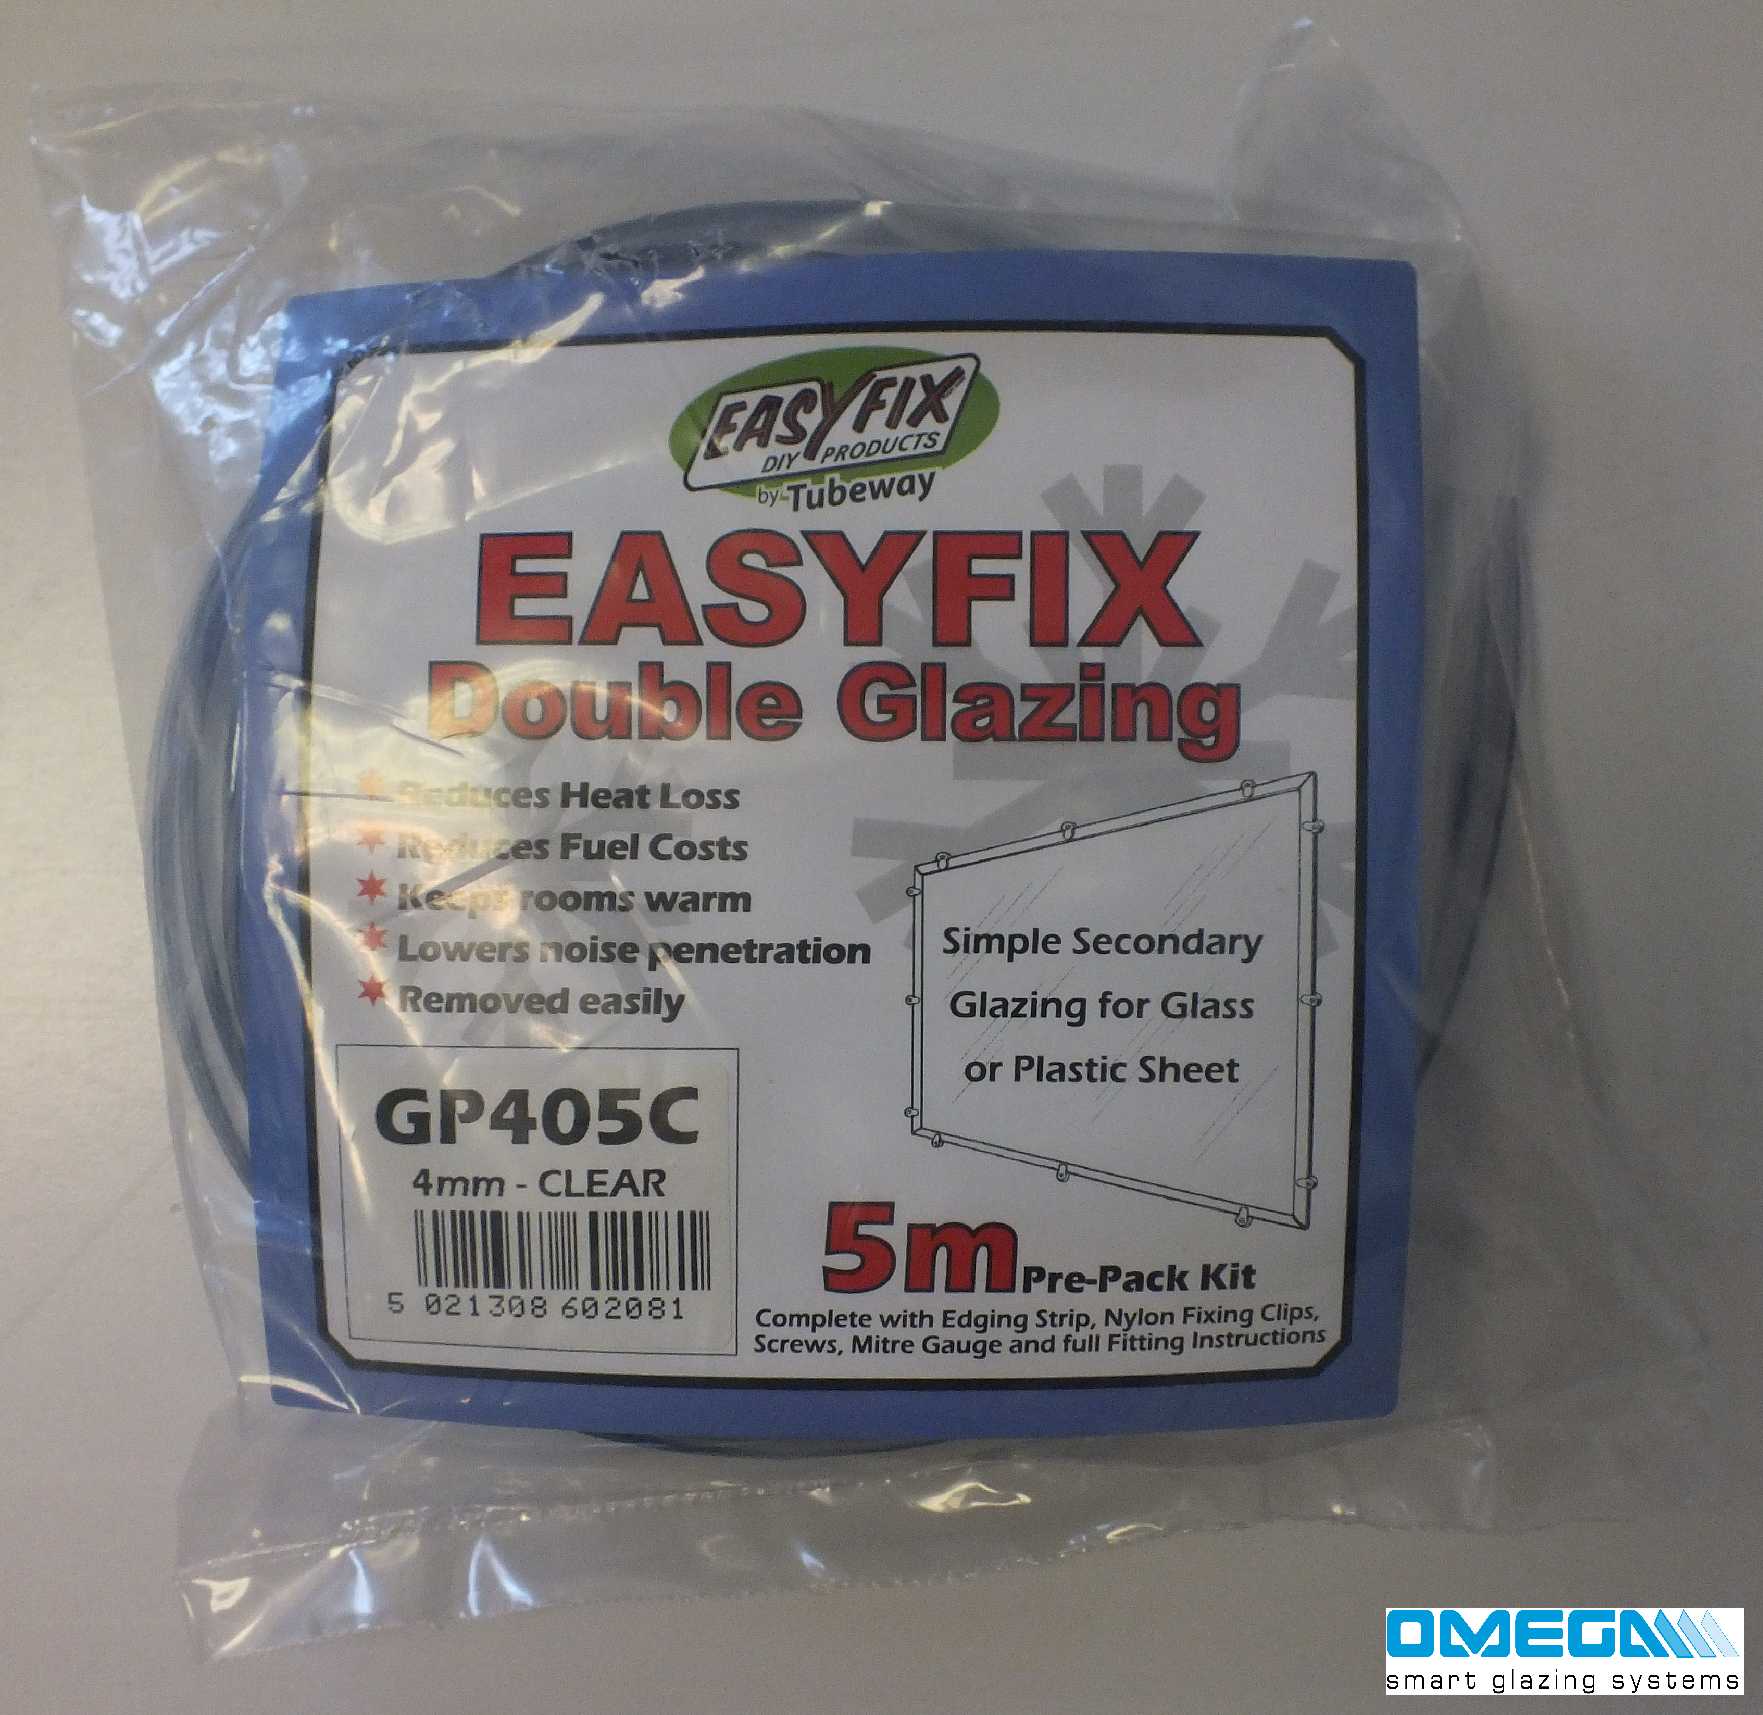 Buy Easyfix Clipglaze Edging Kit - 5m roll of edging for 3mm Glazing Thickness, White, Clear or Brown online today